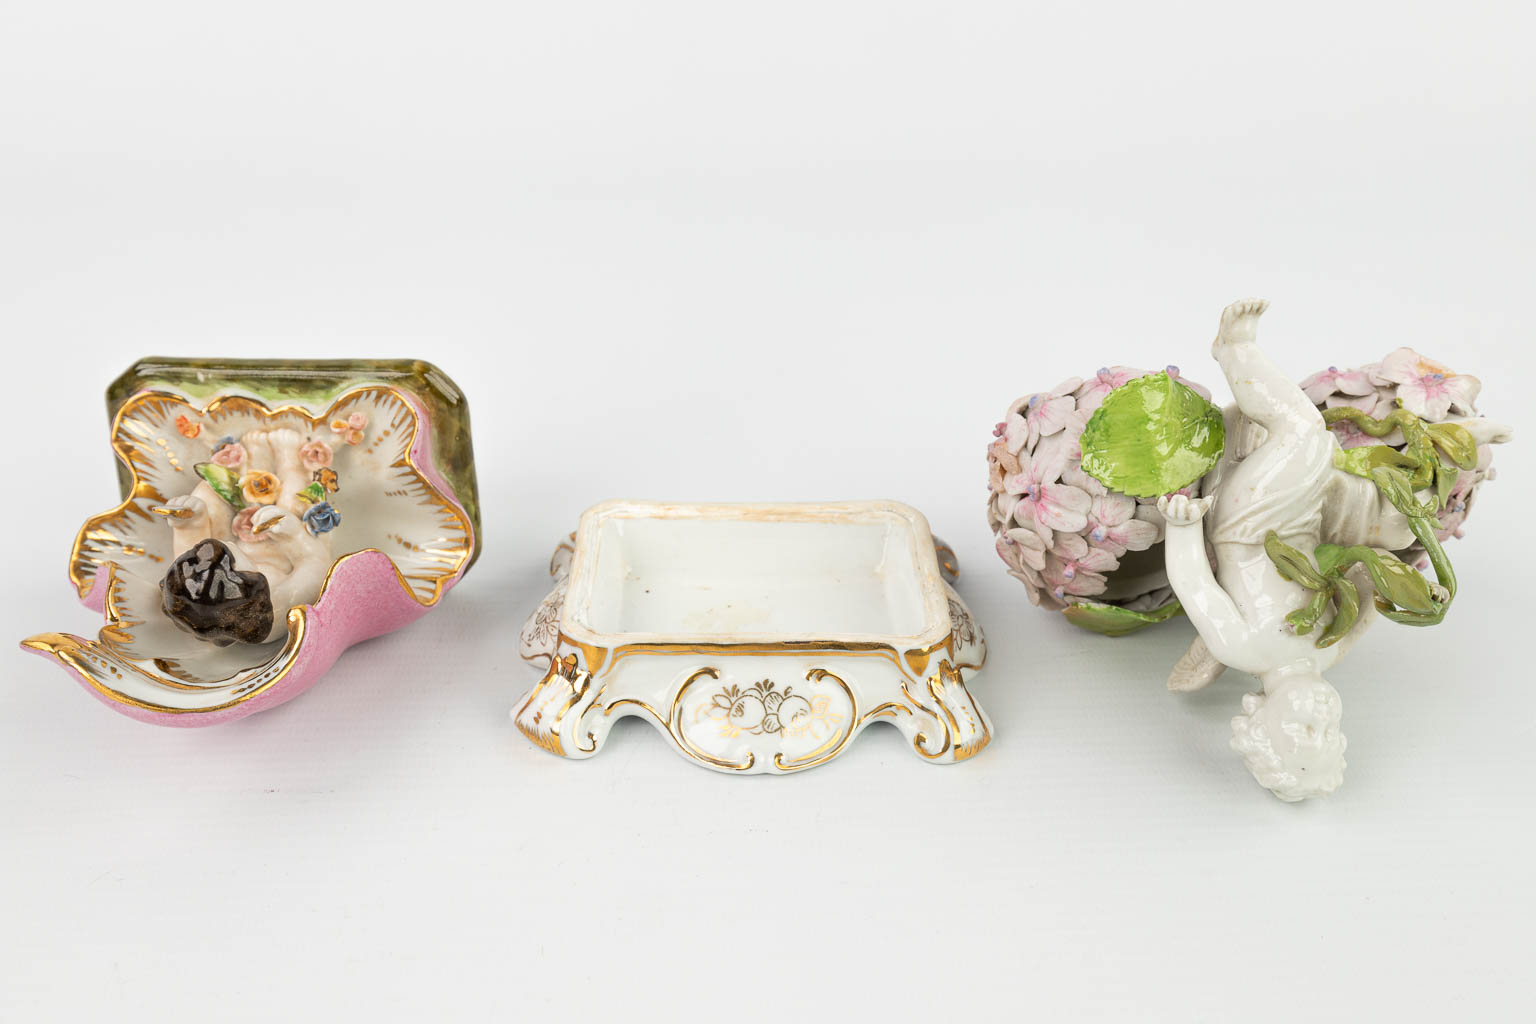 A collection of 5 figurines of putti. Made of porcelain by different factories. (H:14cm)